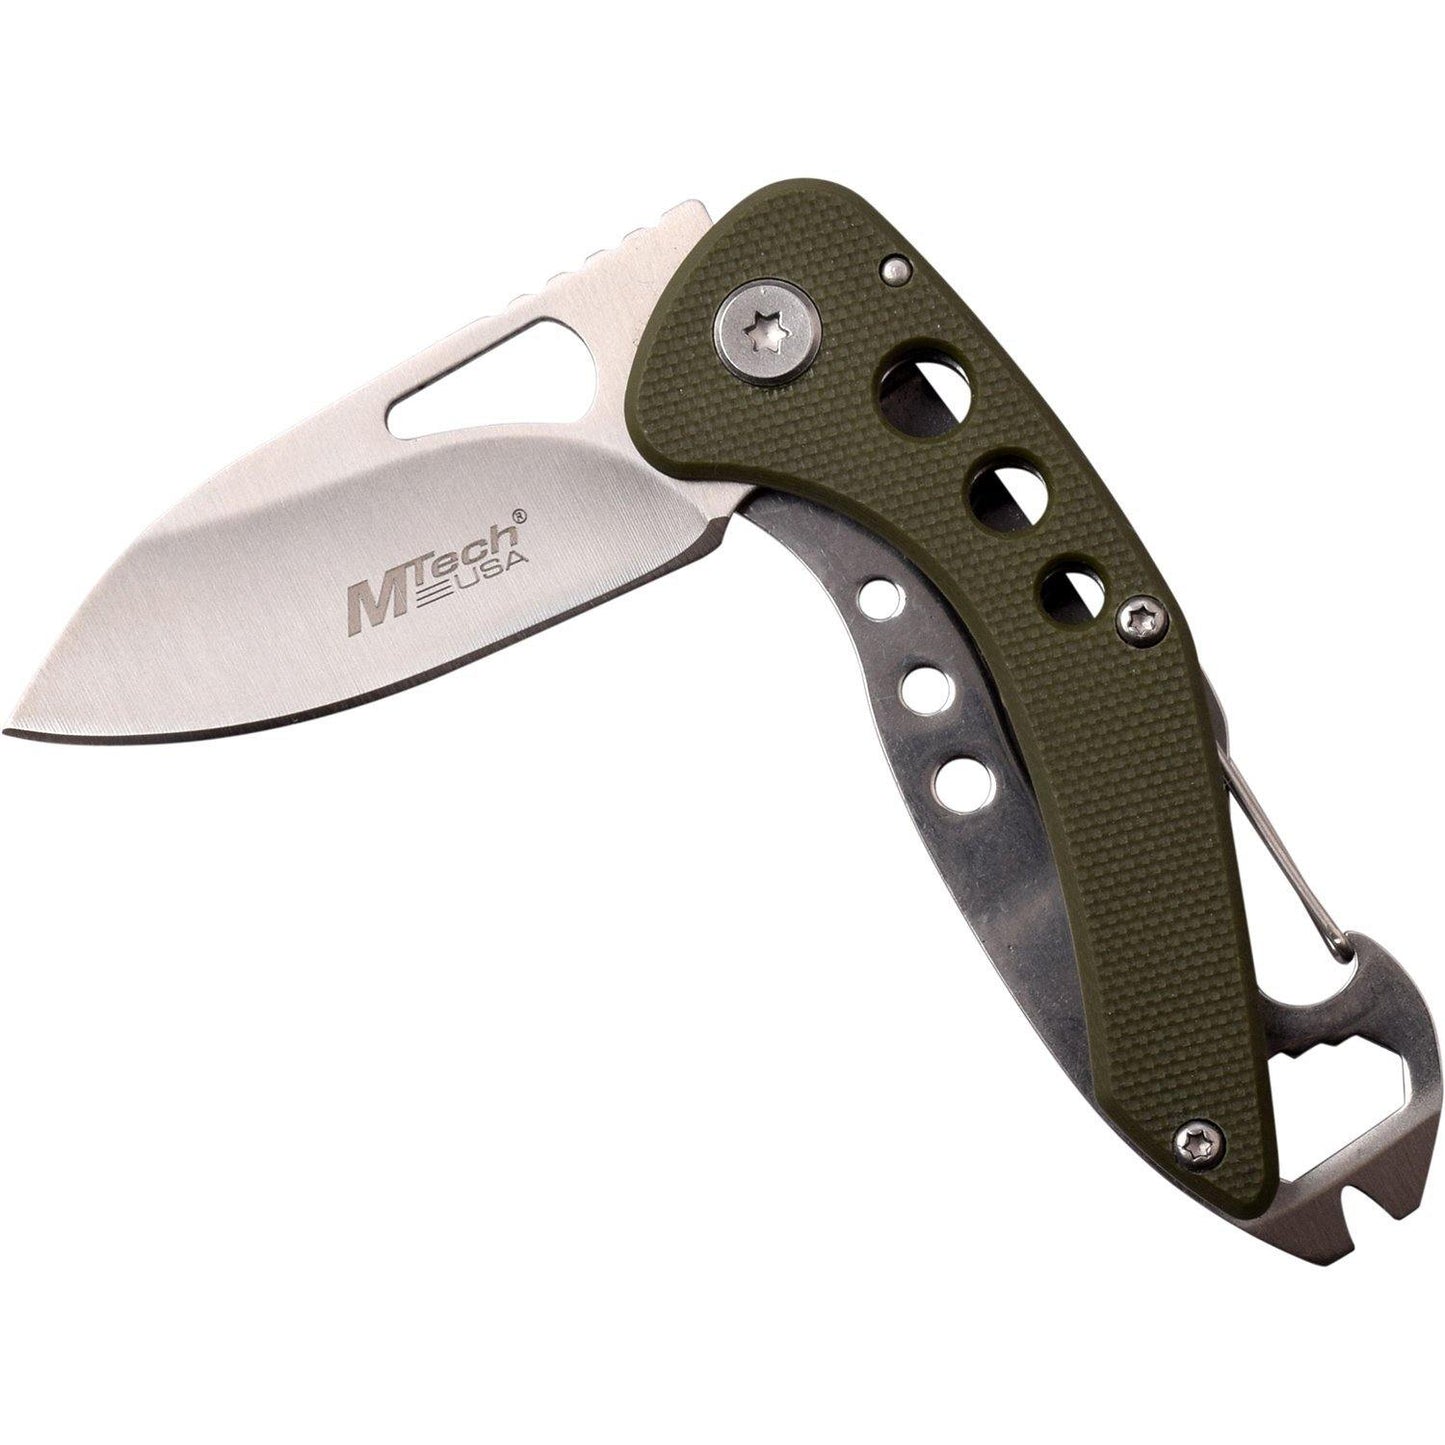 Mtech Drop Point Fine Edge Blade Multifunction Folding Knife - 5.6 Inches G10 Handle #mt-1016Gn - Xhunter New Zealand